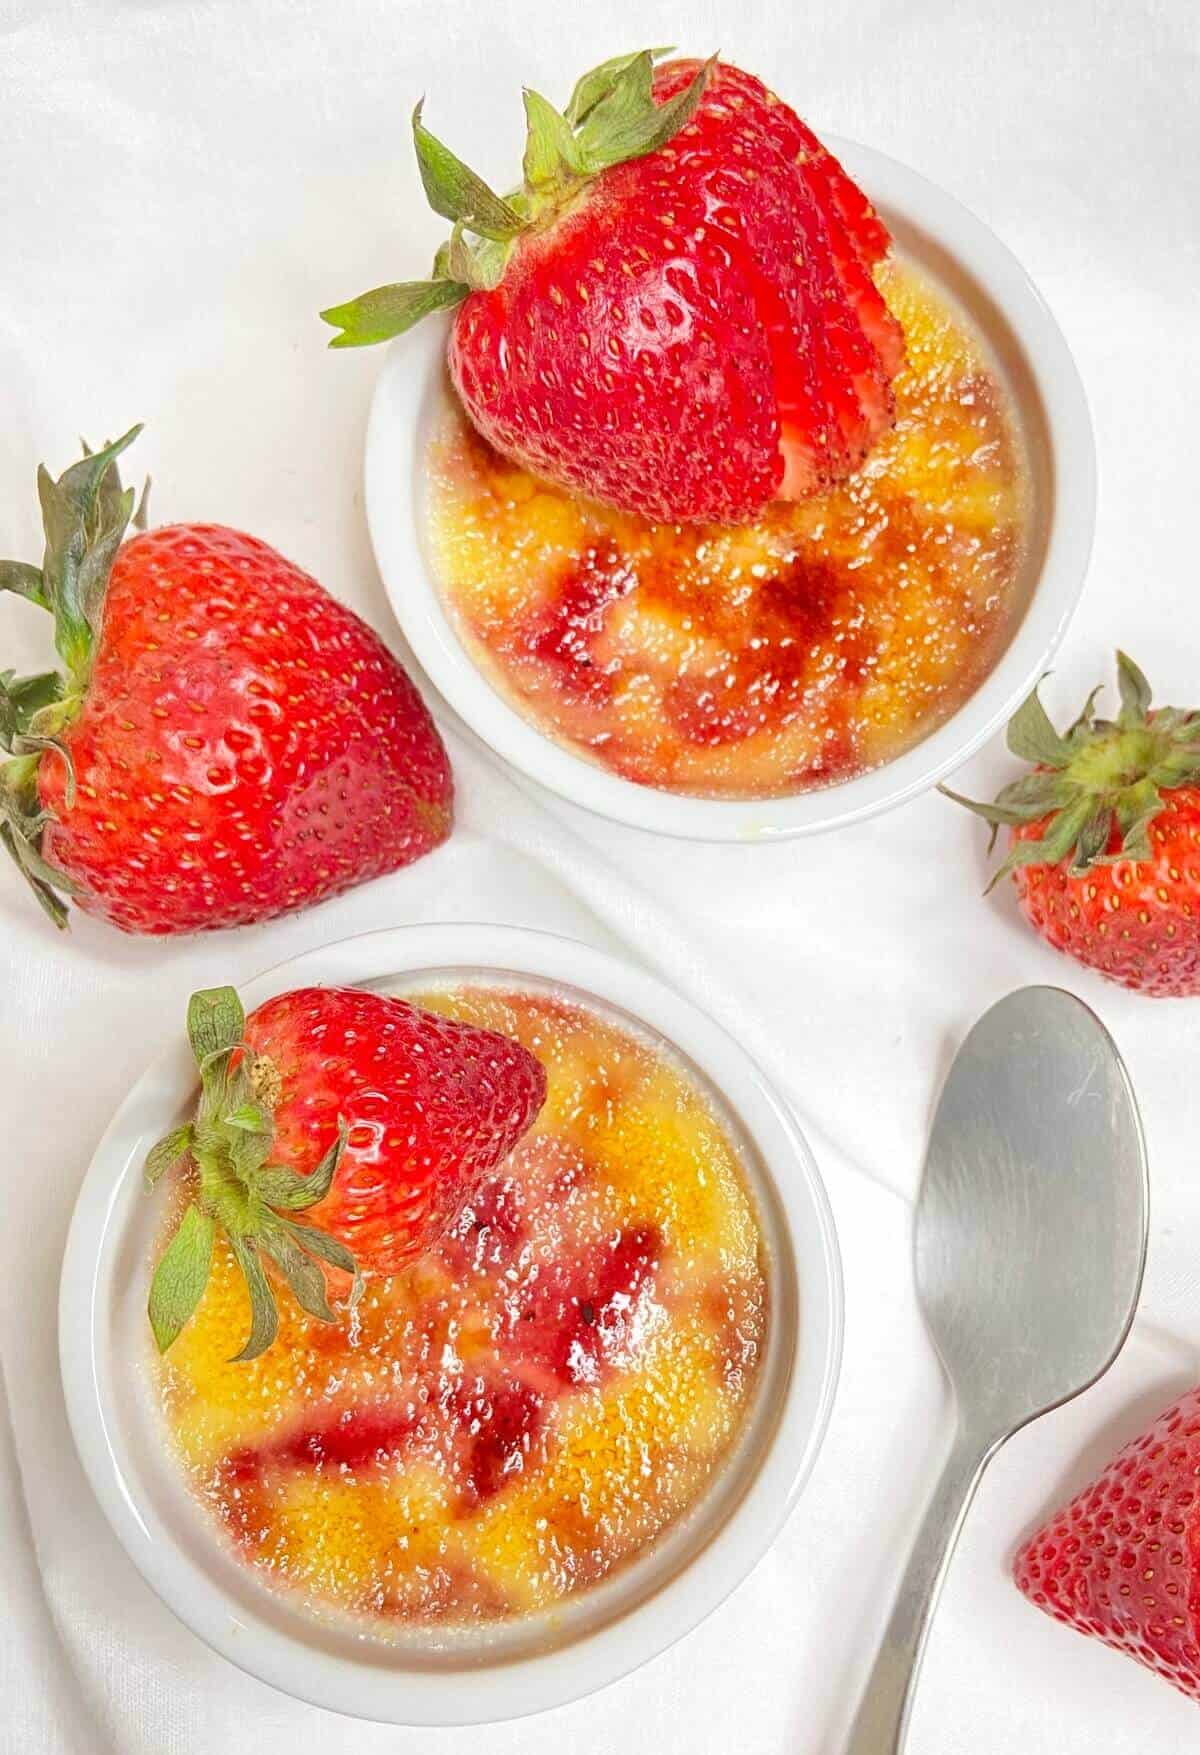 Finished creme brulee with strawberries on top.